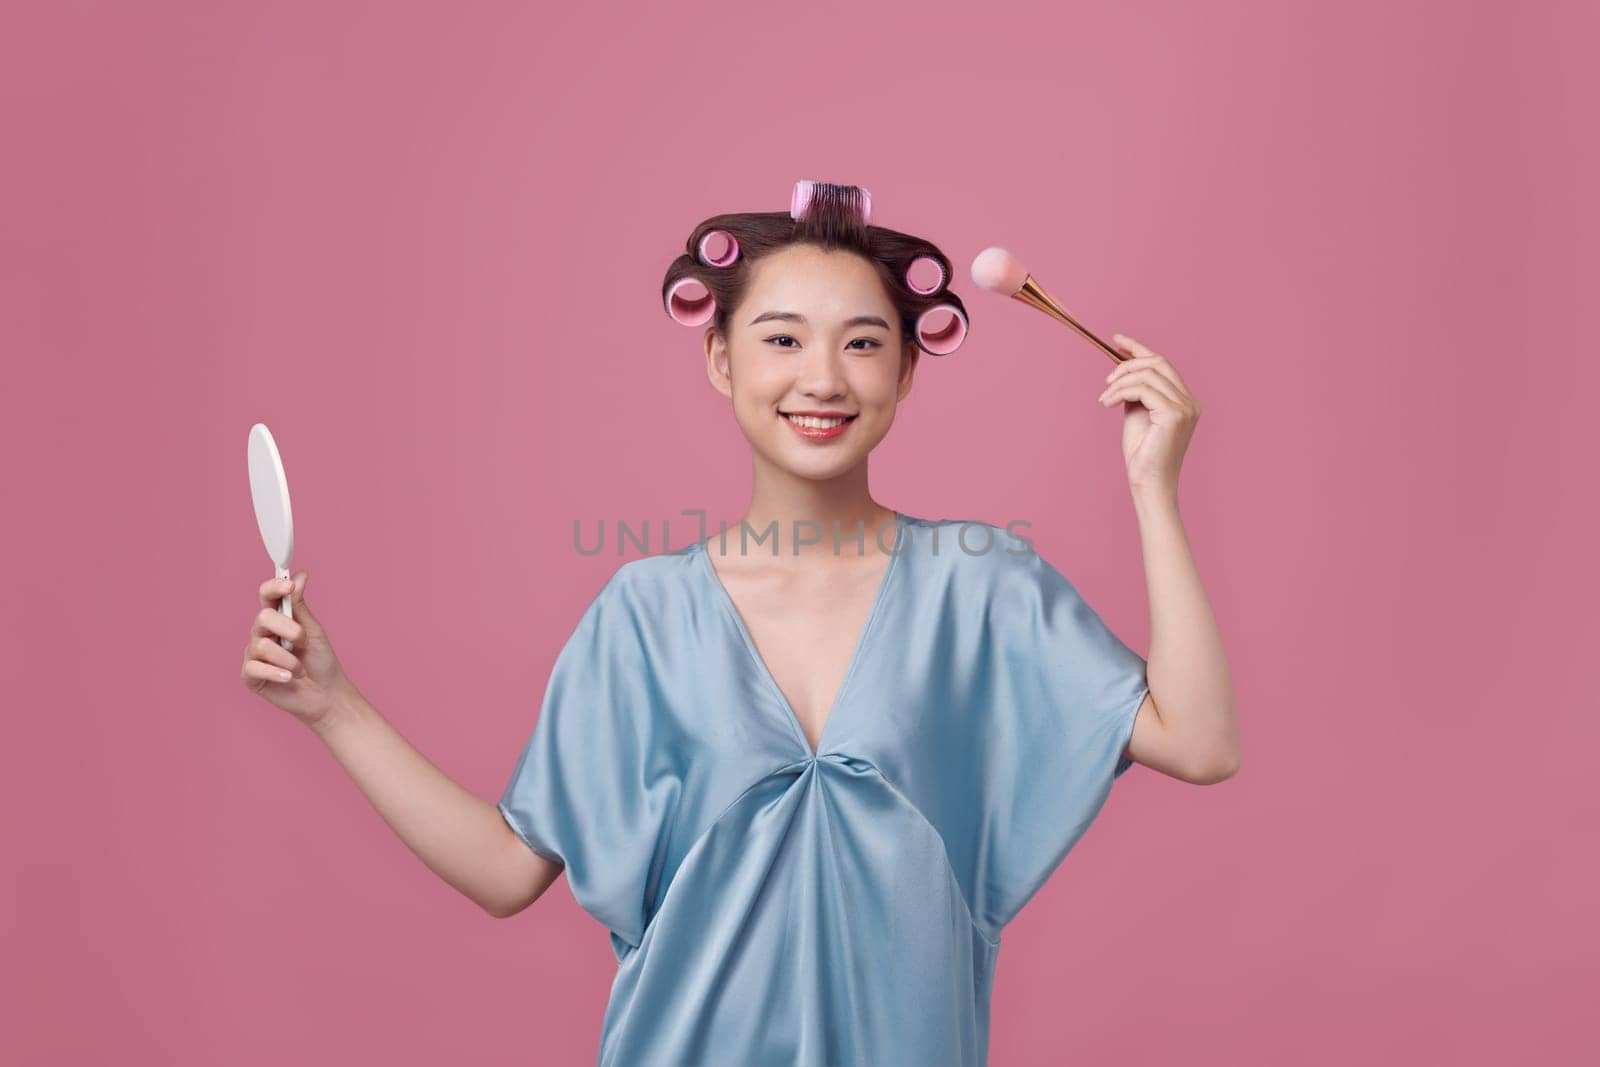 Pretty woman with curlers on hair, holding makeup brushes and mirror in hands 